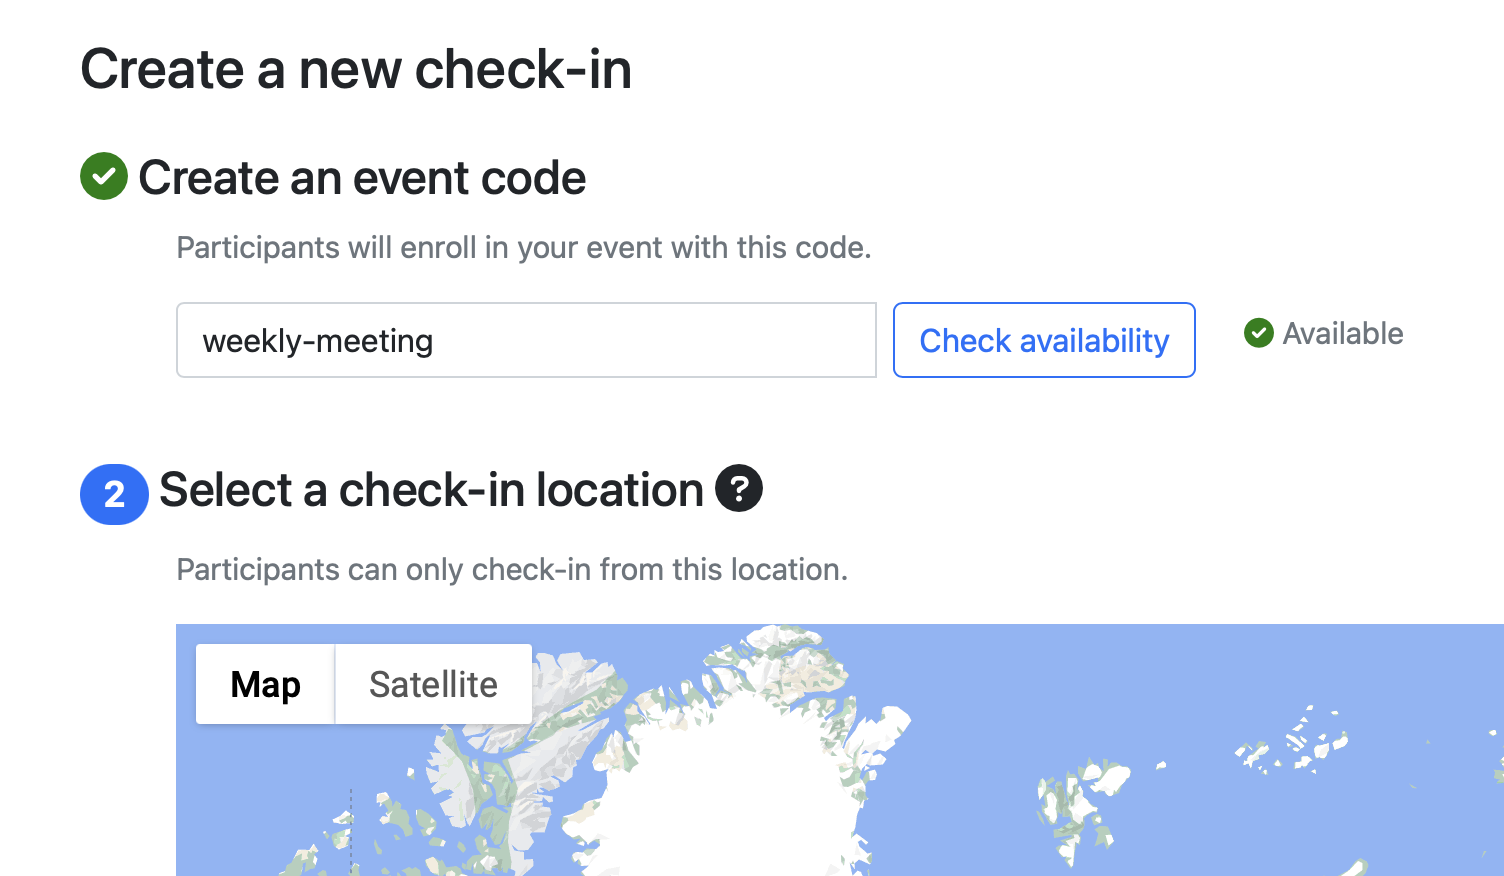 Sample page showing how to configure a check-in event.